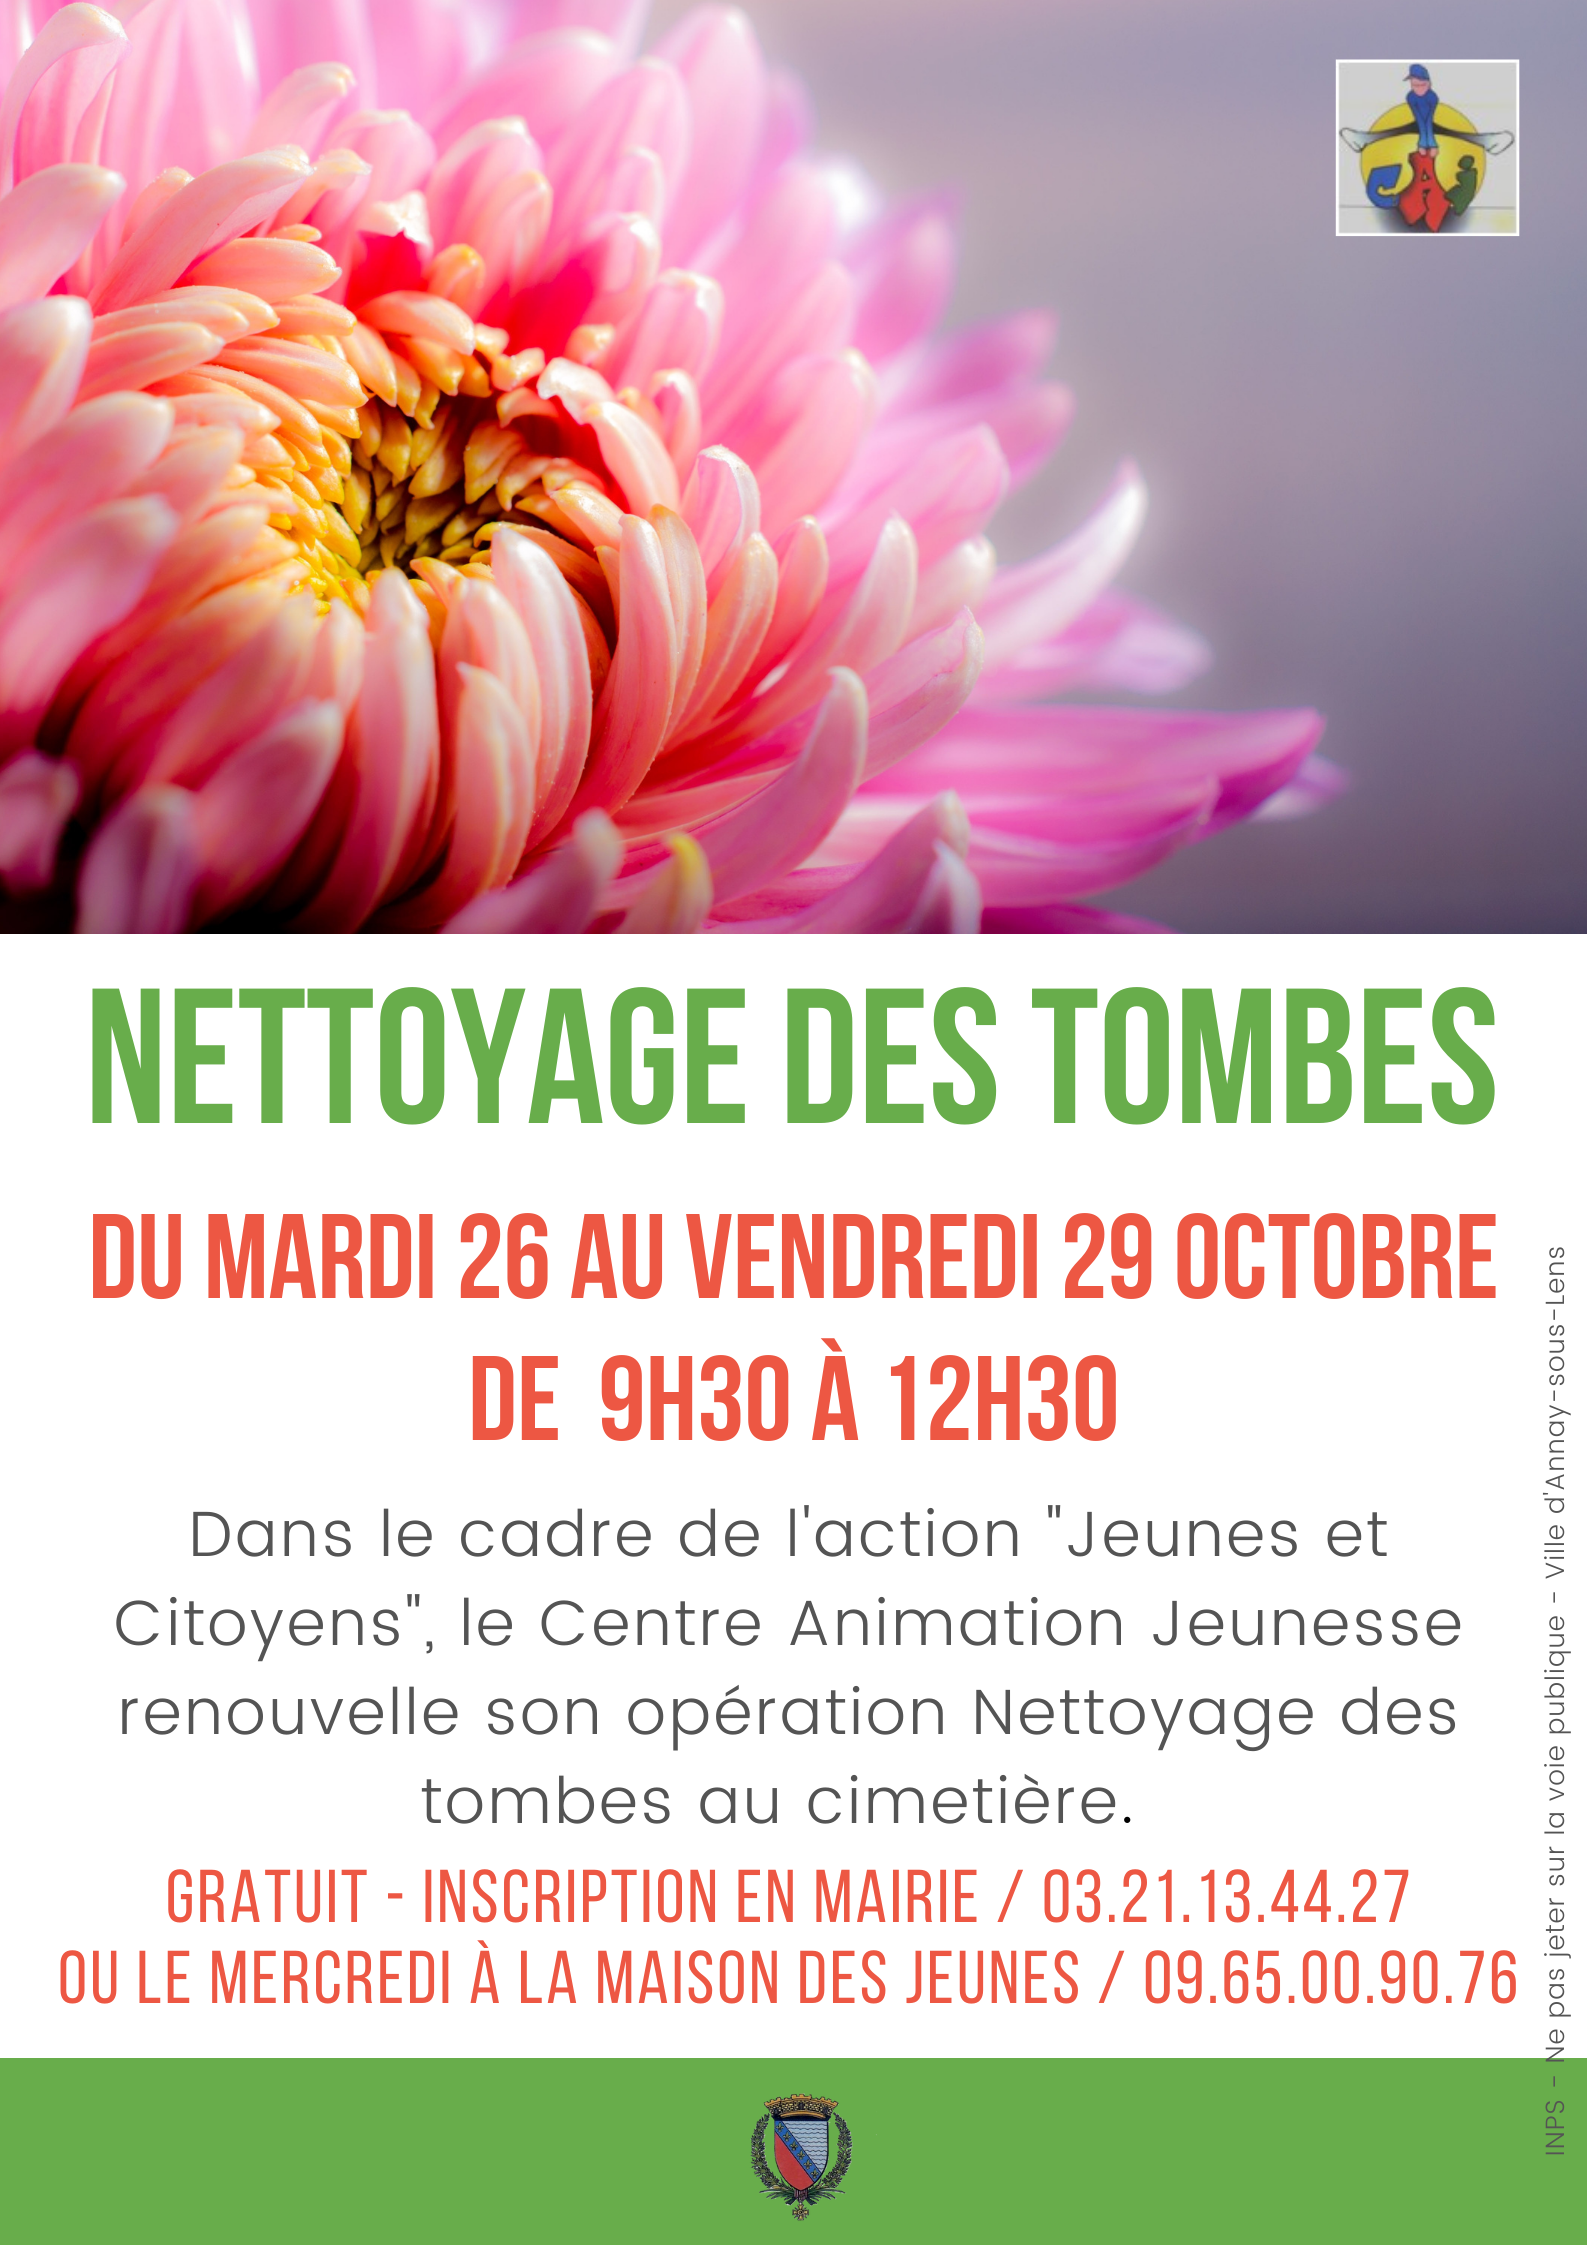 Nettoyage des tombes